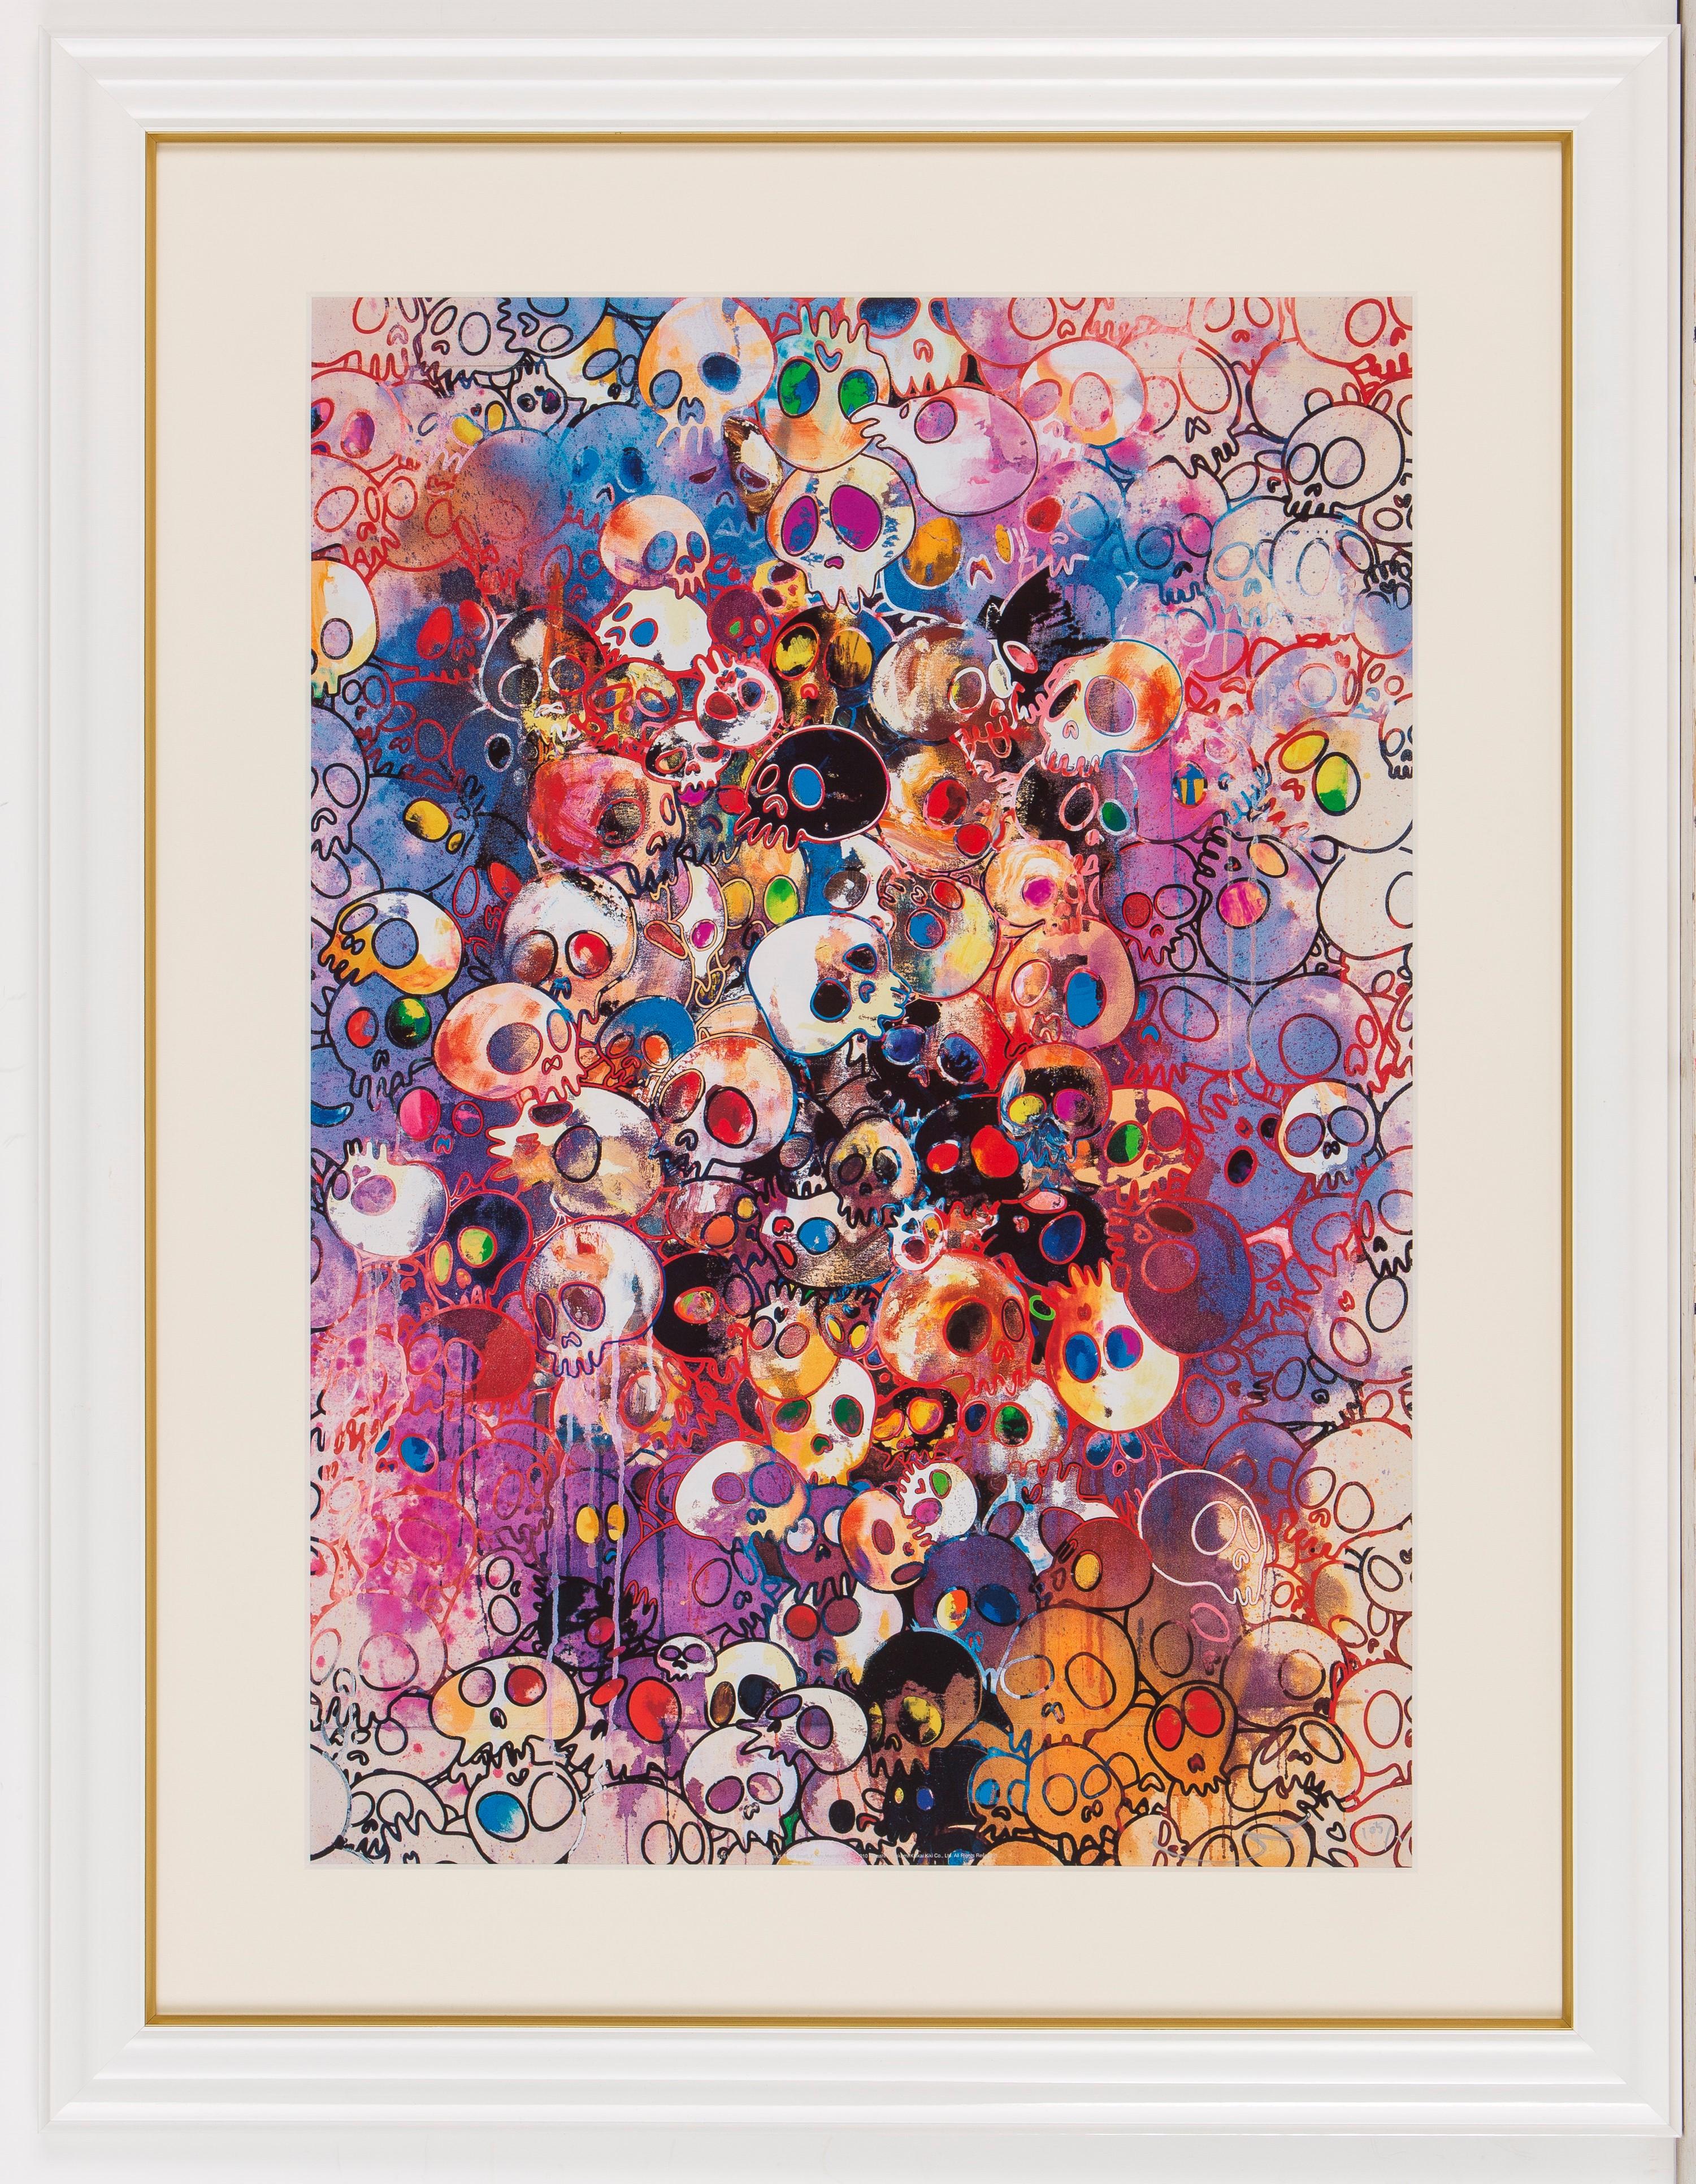 Takashi Murakami, Pastel colored flowers (2022), Available for Sale